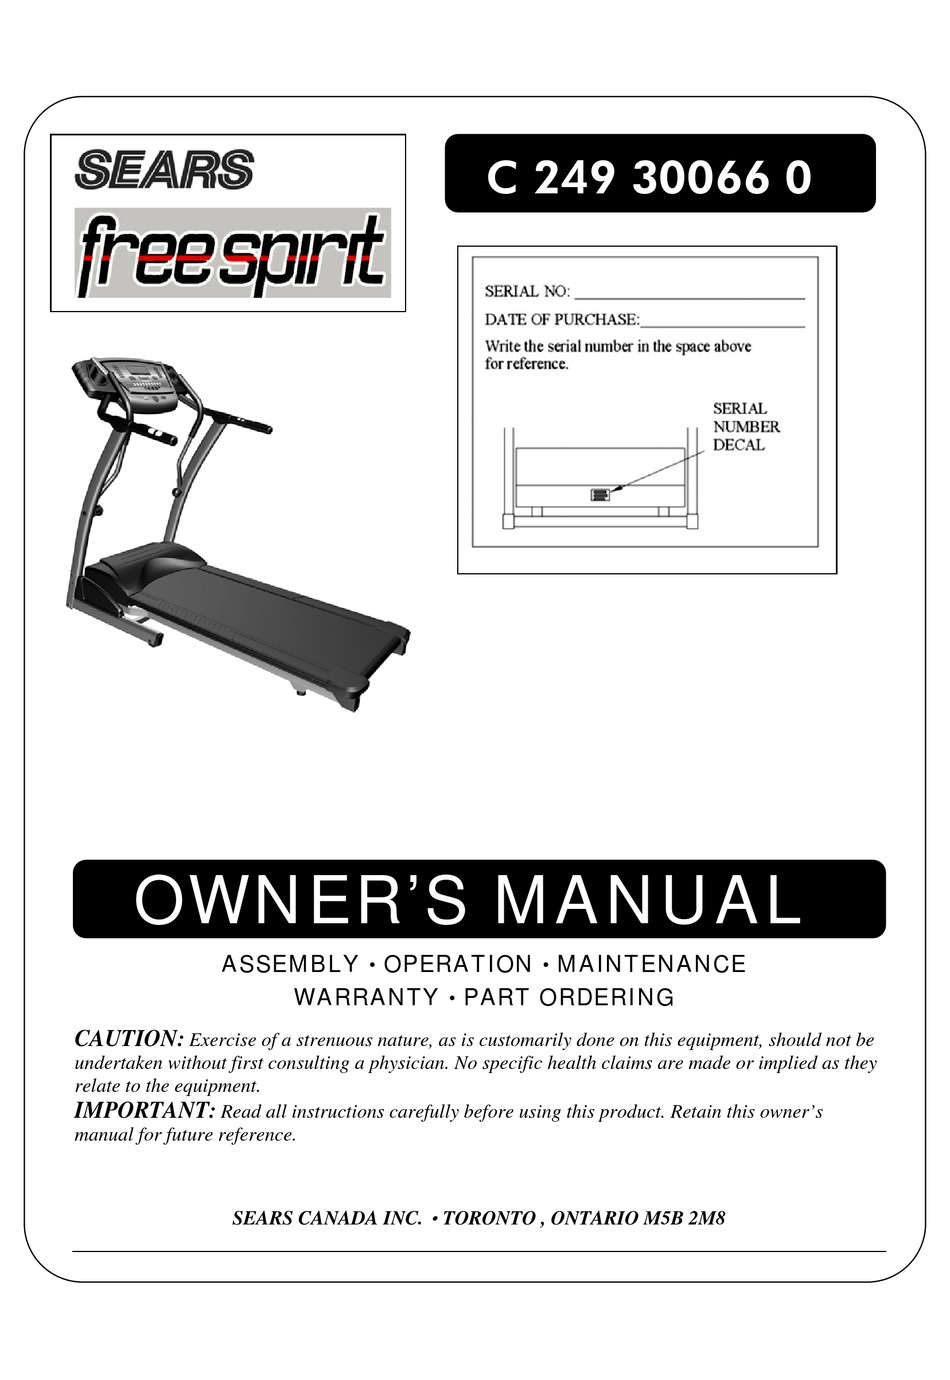 Ordering Replacement Parts - Sears Free Spirit Owner's Manual [Page 35]